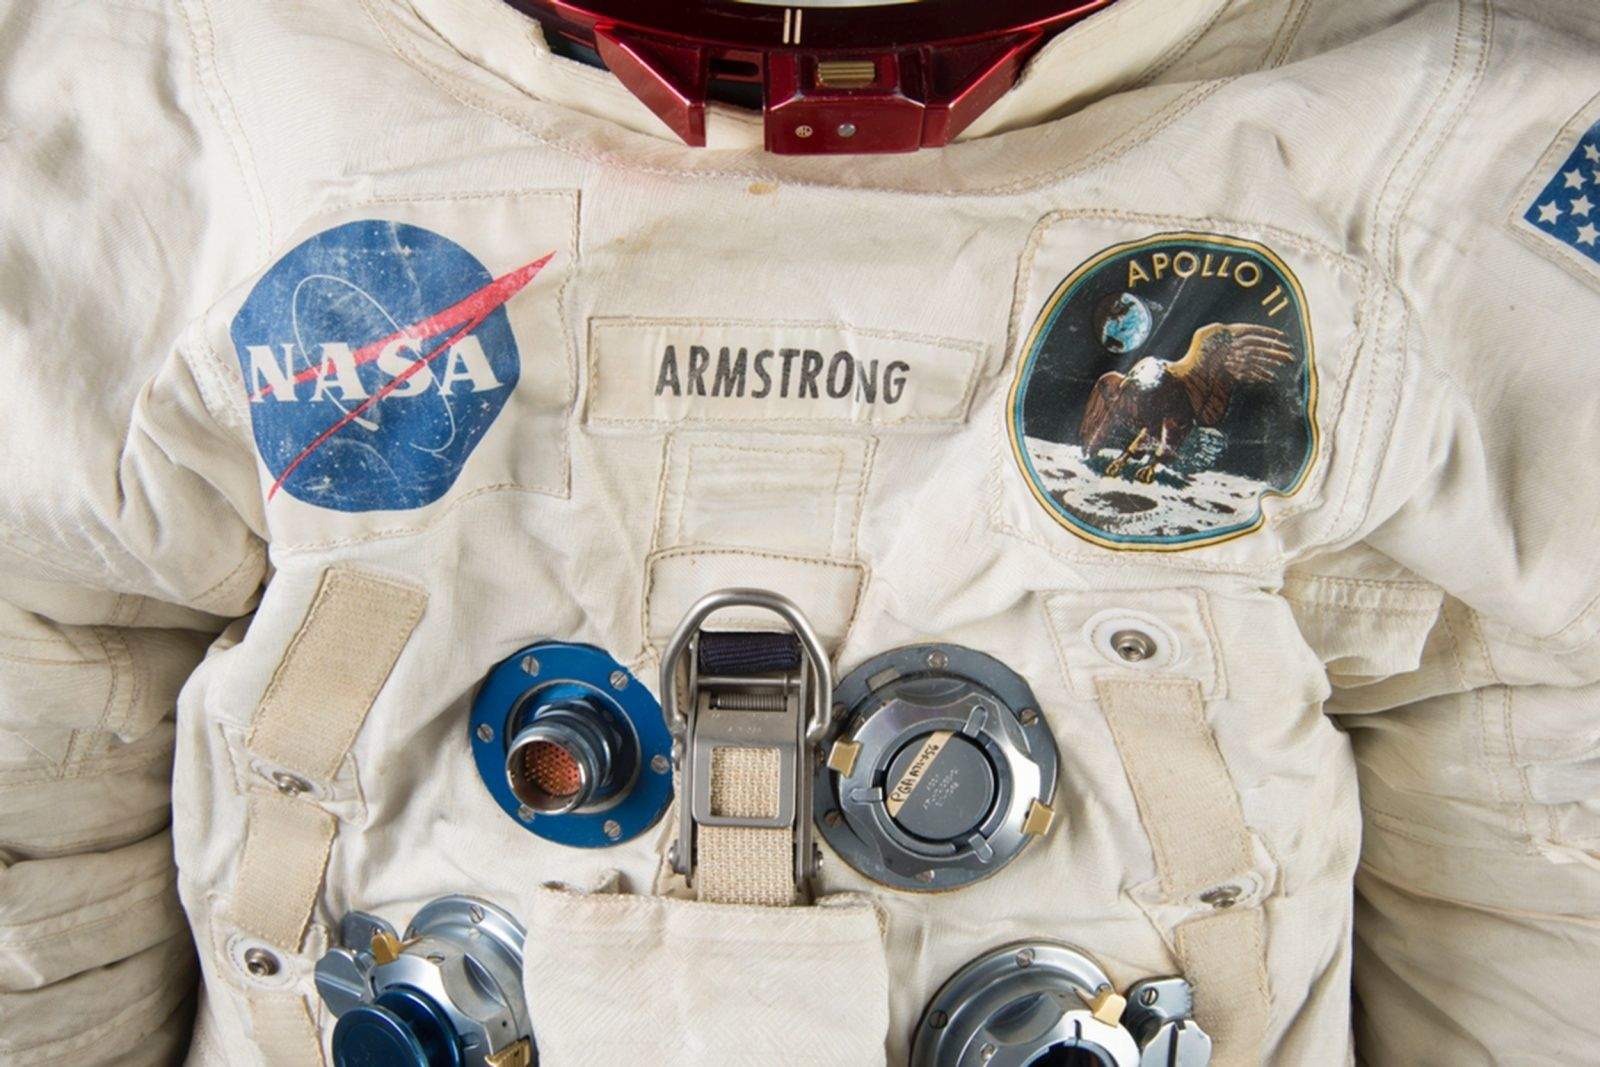 Neil Armstrong's suit needs a little preservation work before it can be displayed in 2019 for the 50th anniversary of the Apollo 11 moon landing.